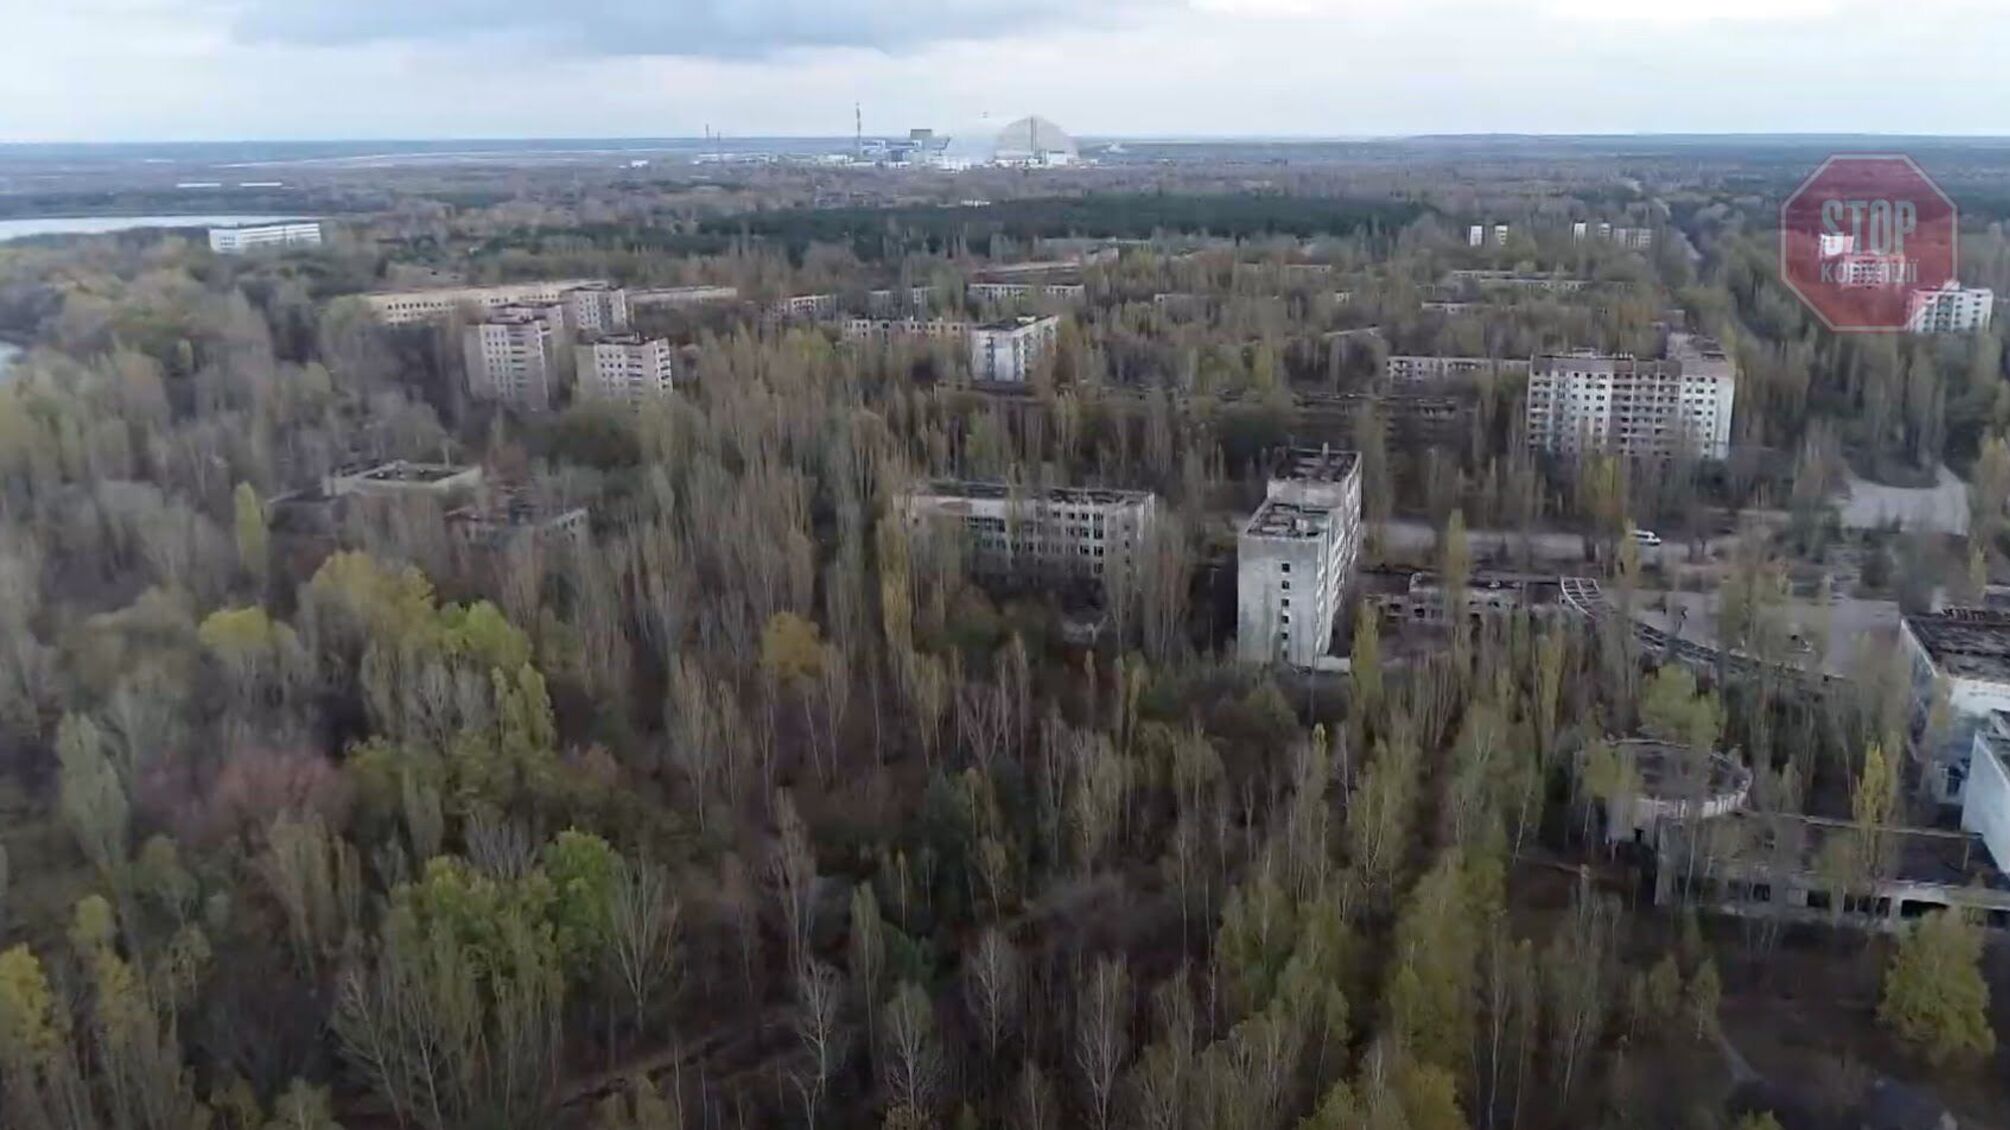 By fires in the Chernobyl zone of financing scandalous "Ukrstroivsky" project can increase?